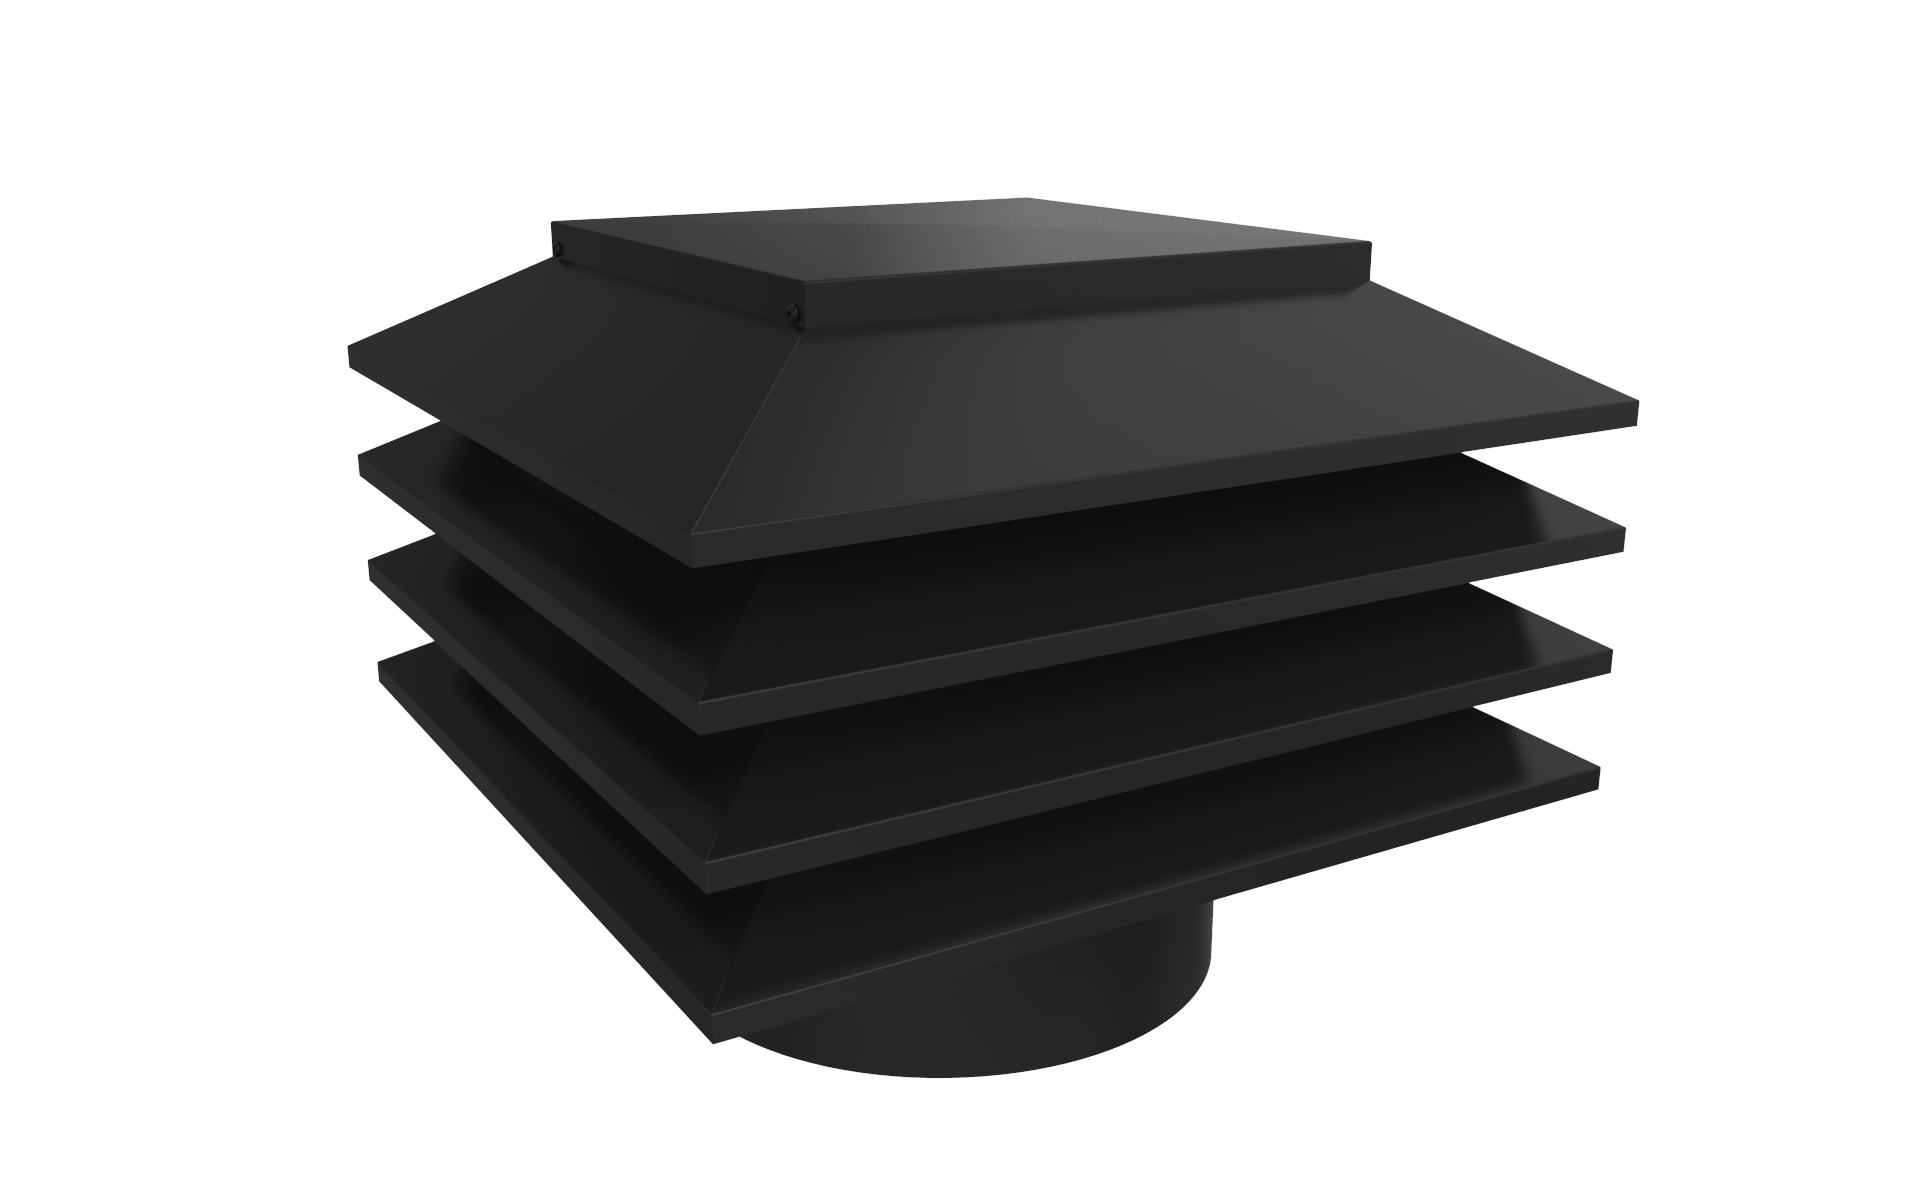 Roof Vent VMAX-401 for ventilation area 800 to 1000 ft2